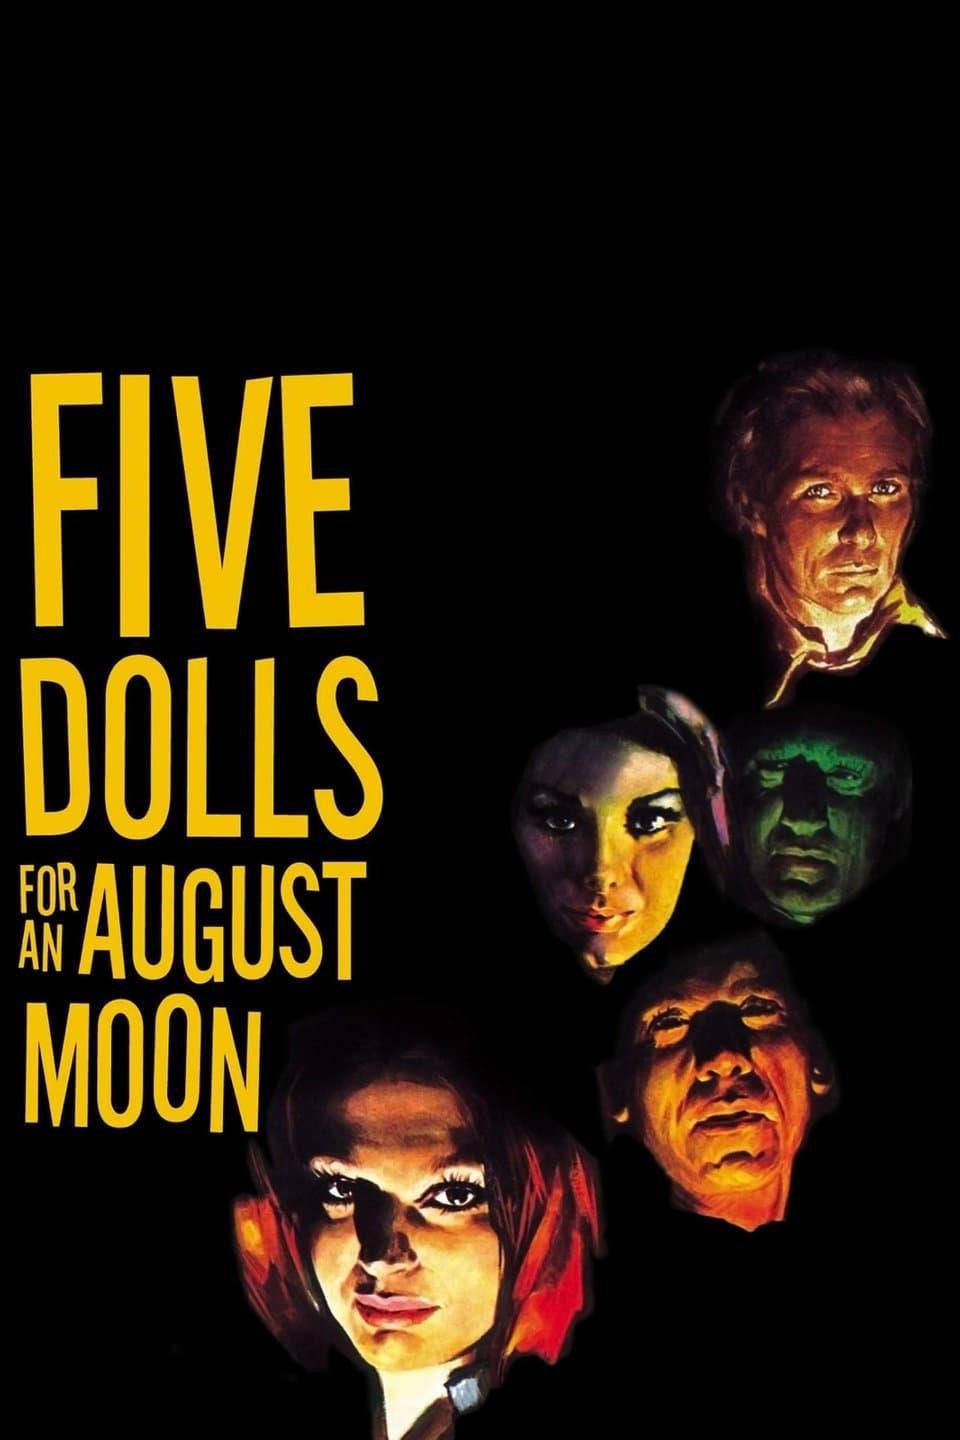 Five Dolls for an August Moon poster